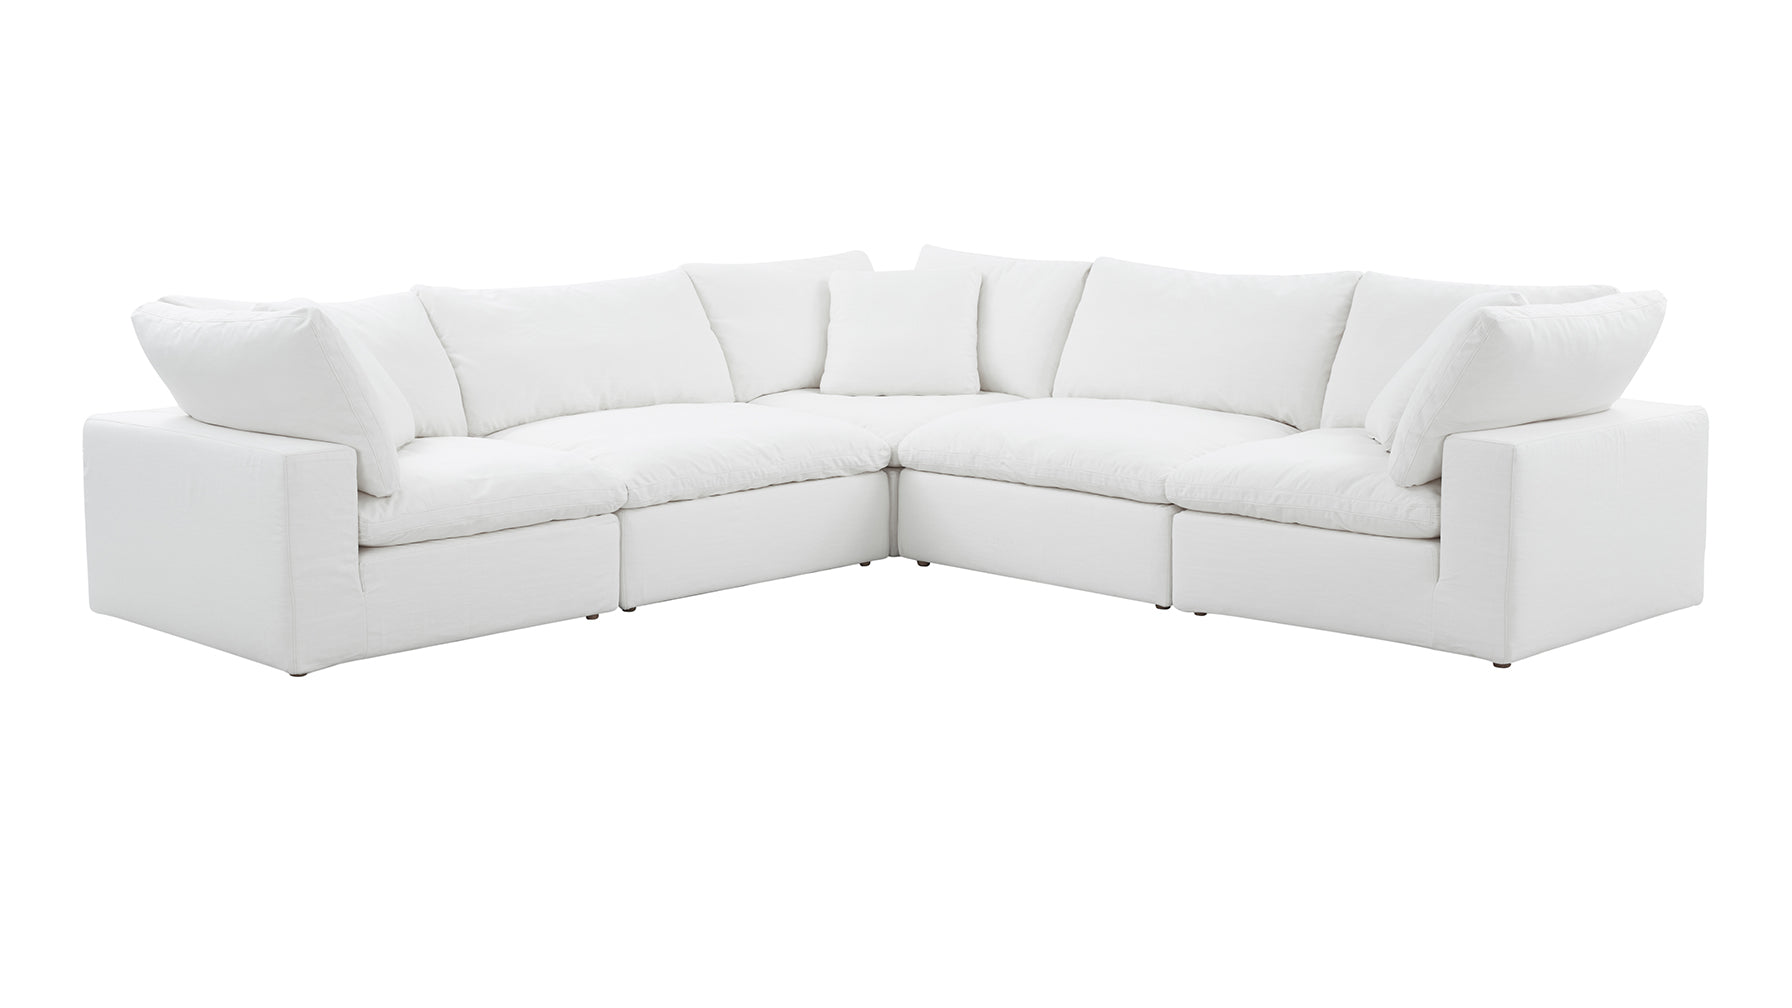 Movie Night™ 5-Piece Modular Sectional Closed, Standard, Brie - Image 3